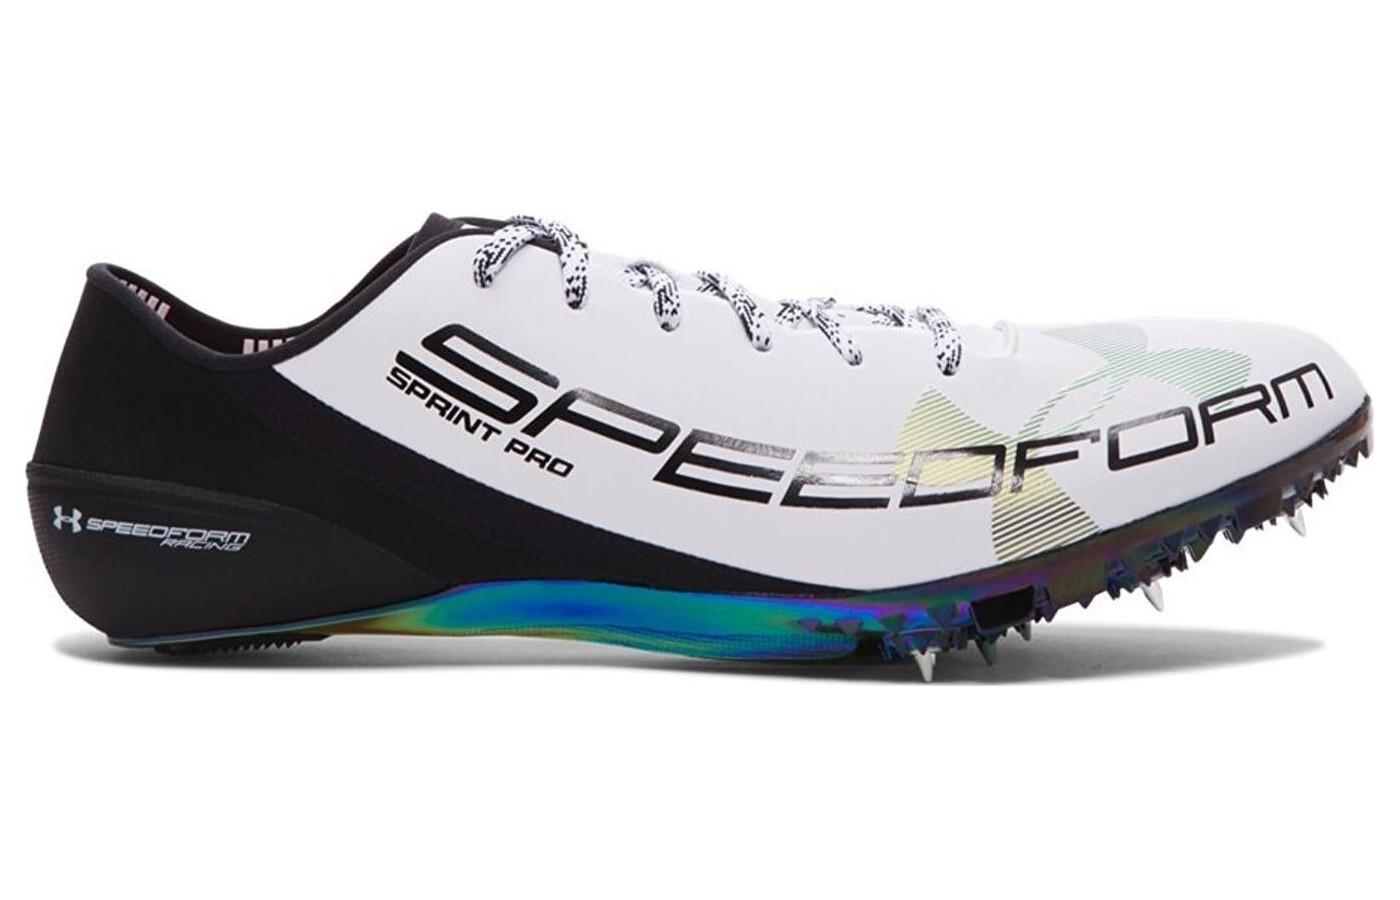 The Under Armour SpeedForm Sprint Pro shown from the side